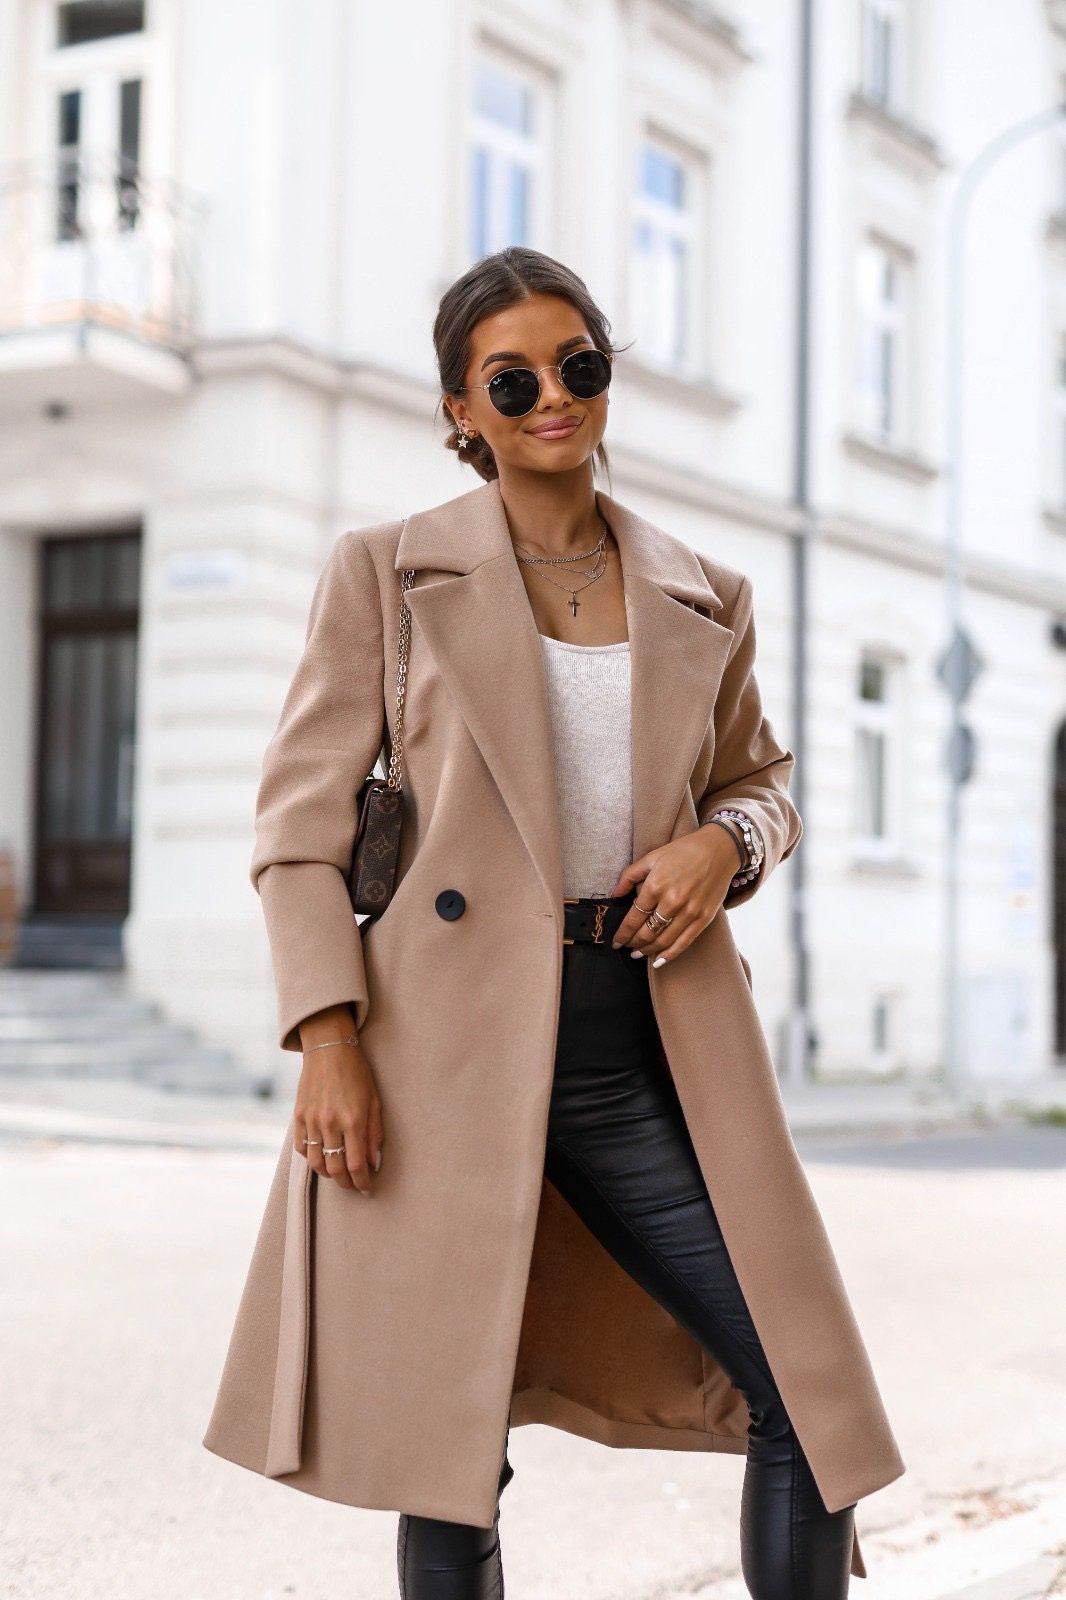 Premium Photo  Paris girl details of everyday look casual beige outfit and  accessories trendy minimalistic style total beige retro aesthetics fashion  fall winter spring look book